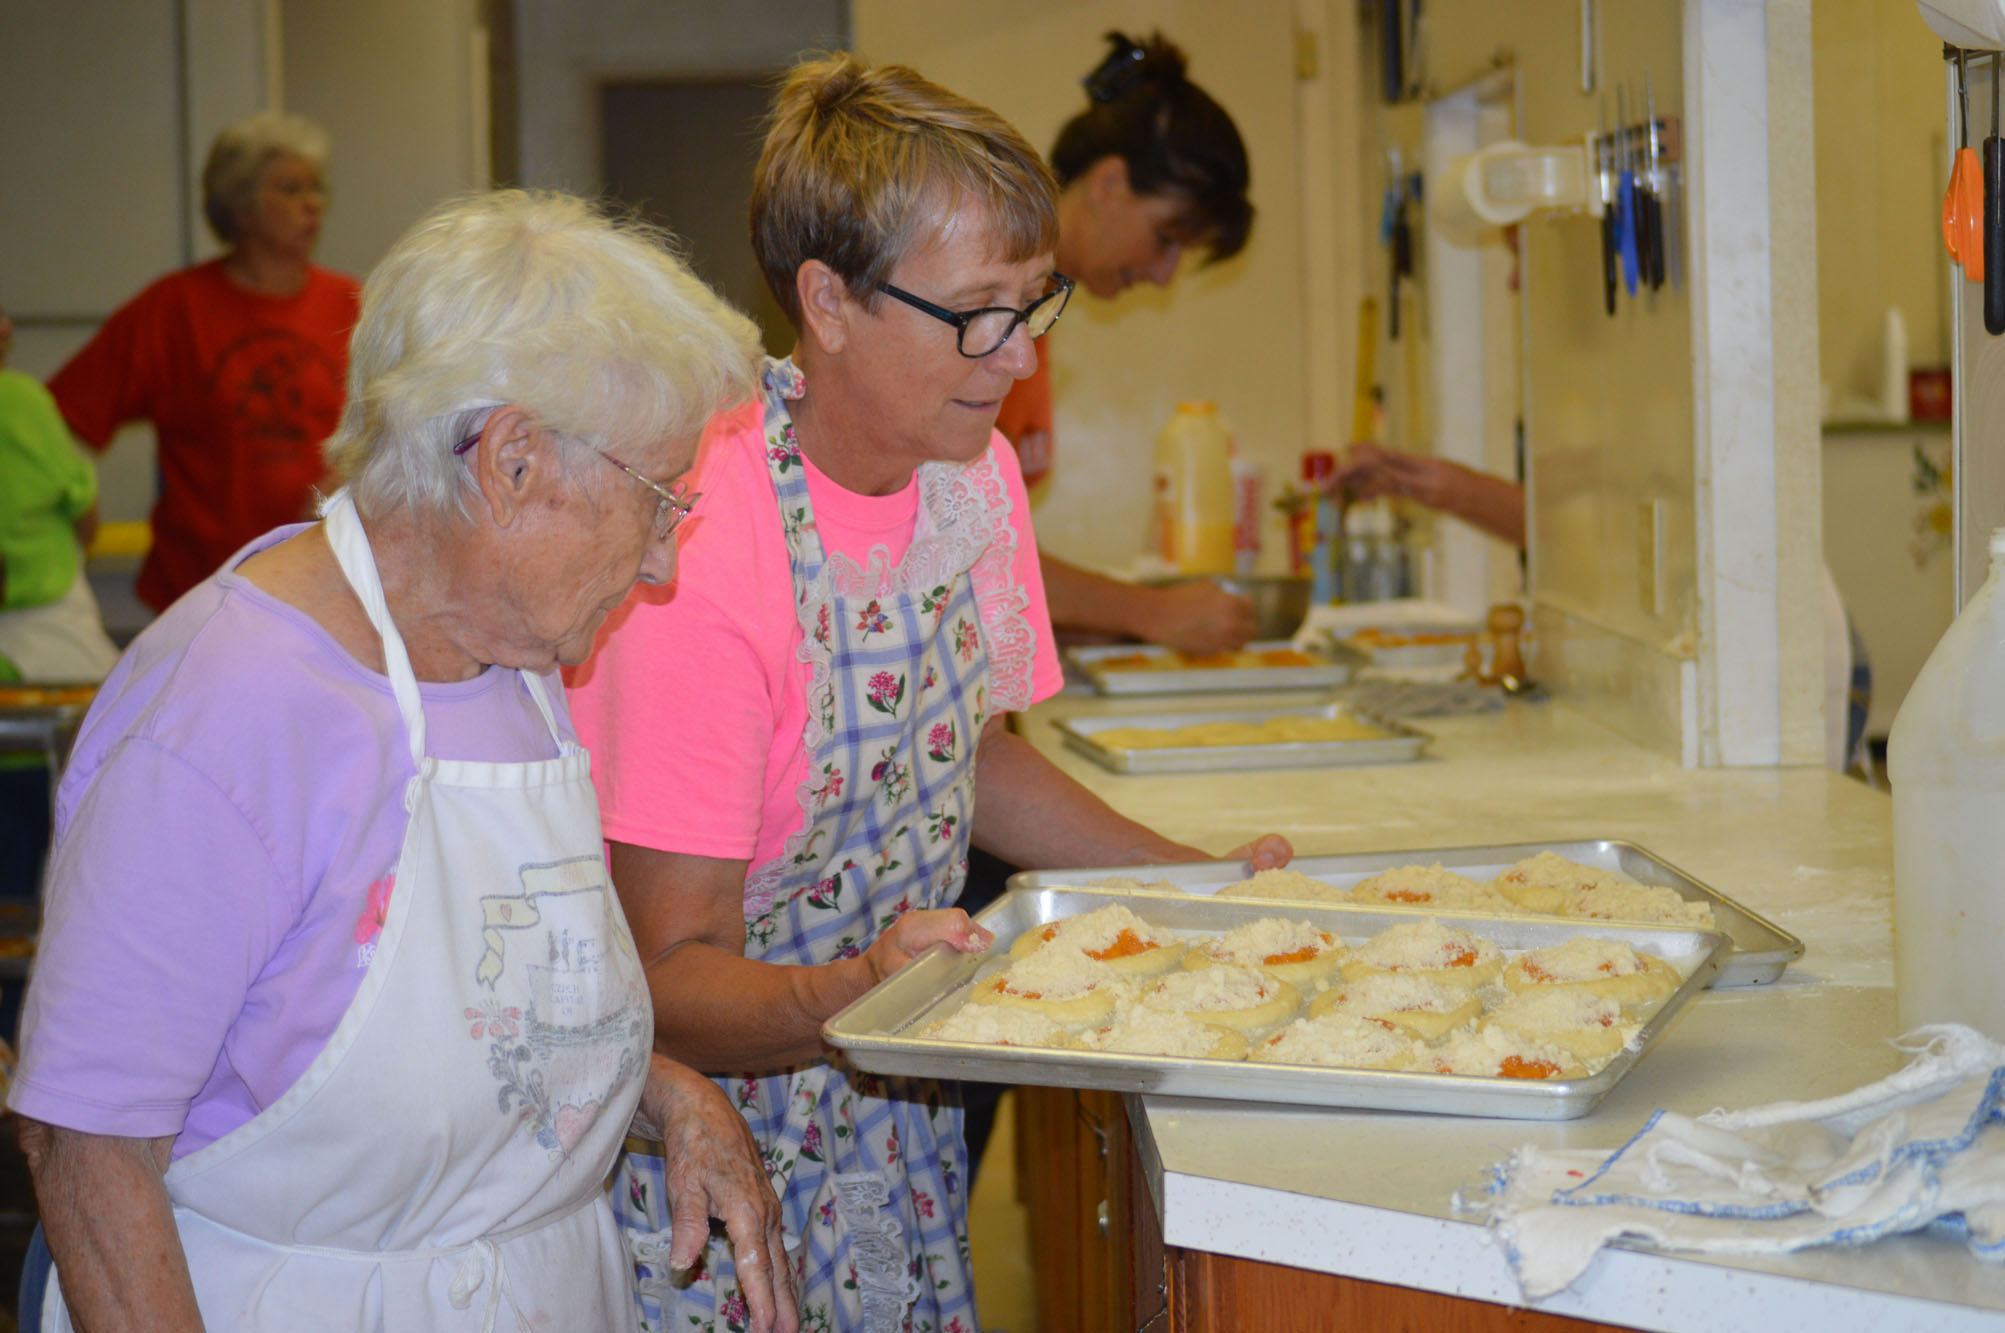 June Calahan and Julia Mason get ready to put Kolaches in the oven.